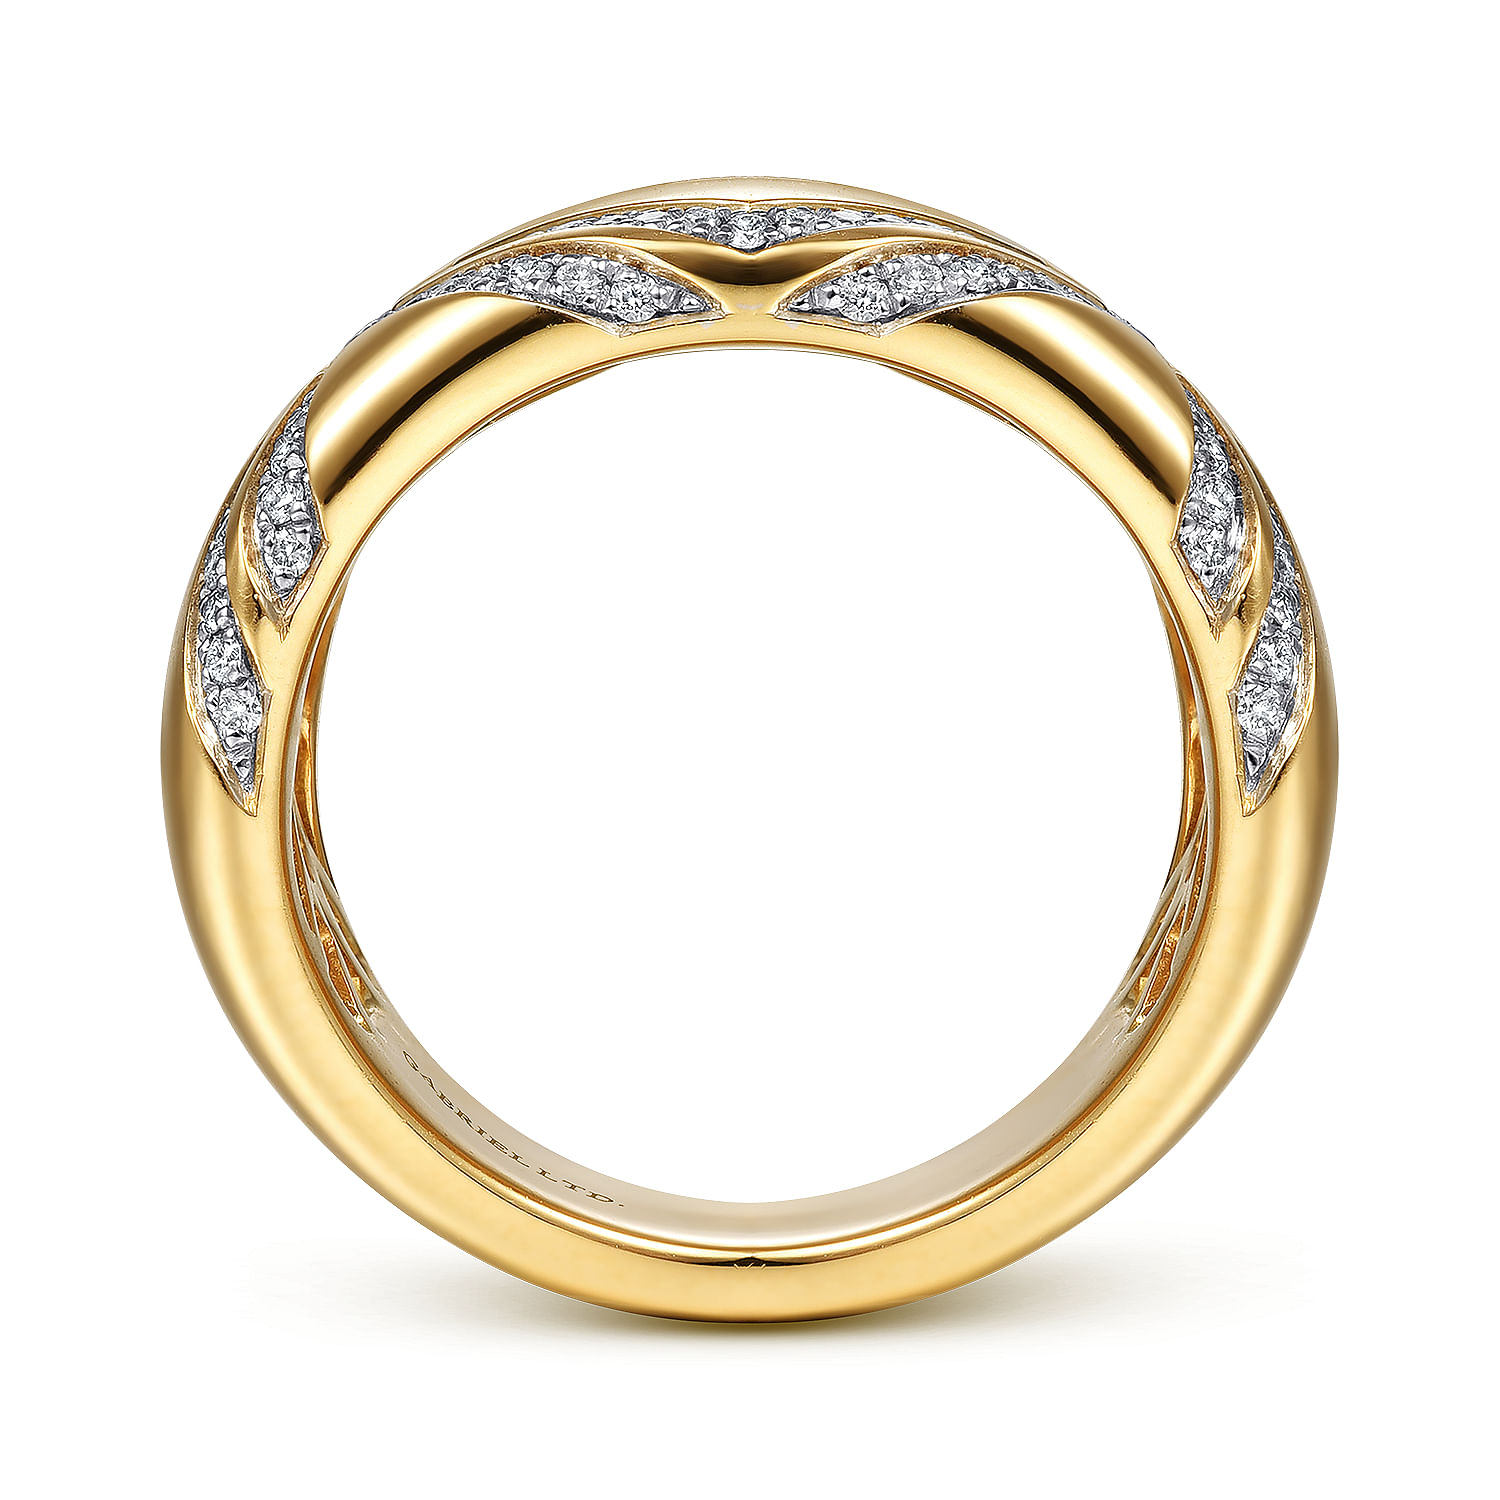 18K Yellow Gold Wide Diamond Ring with Diamond Criss Crossing Rows